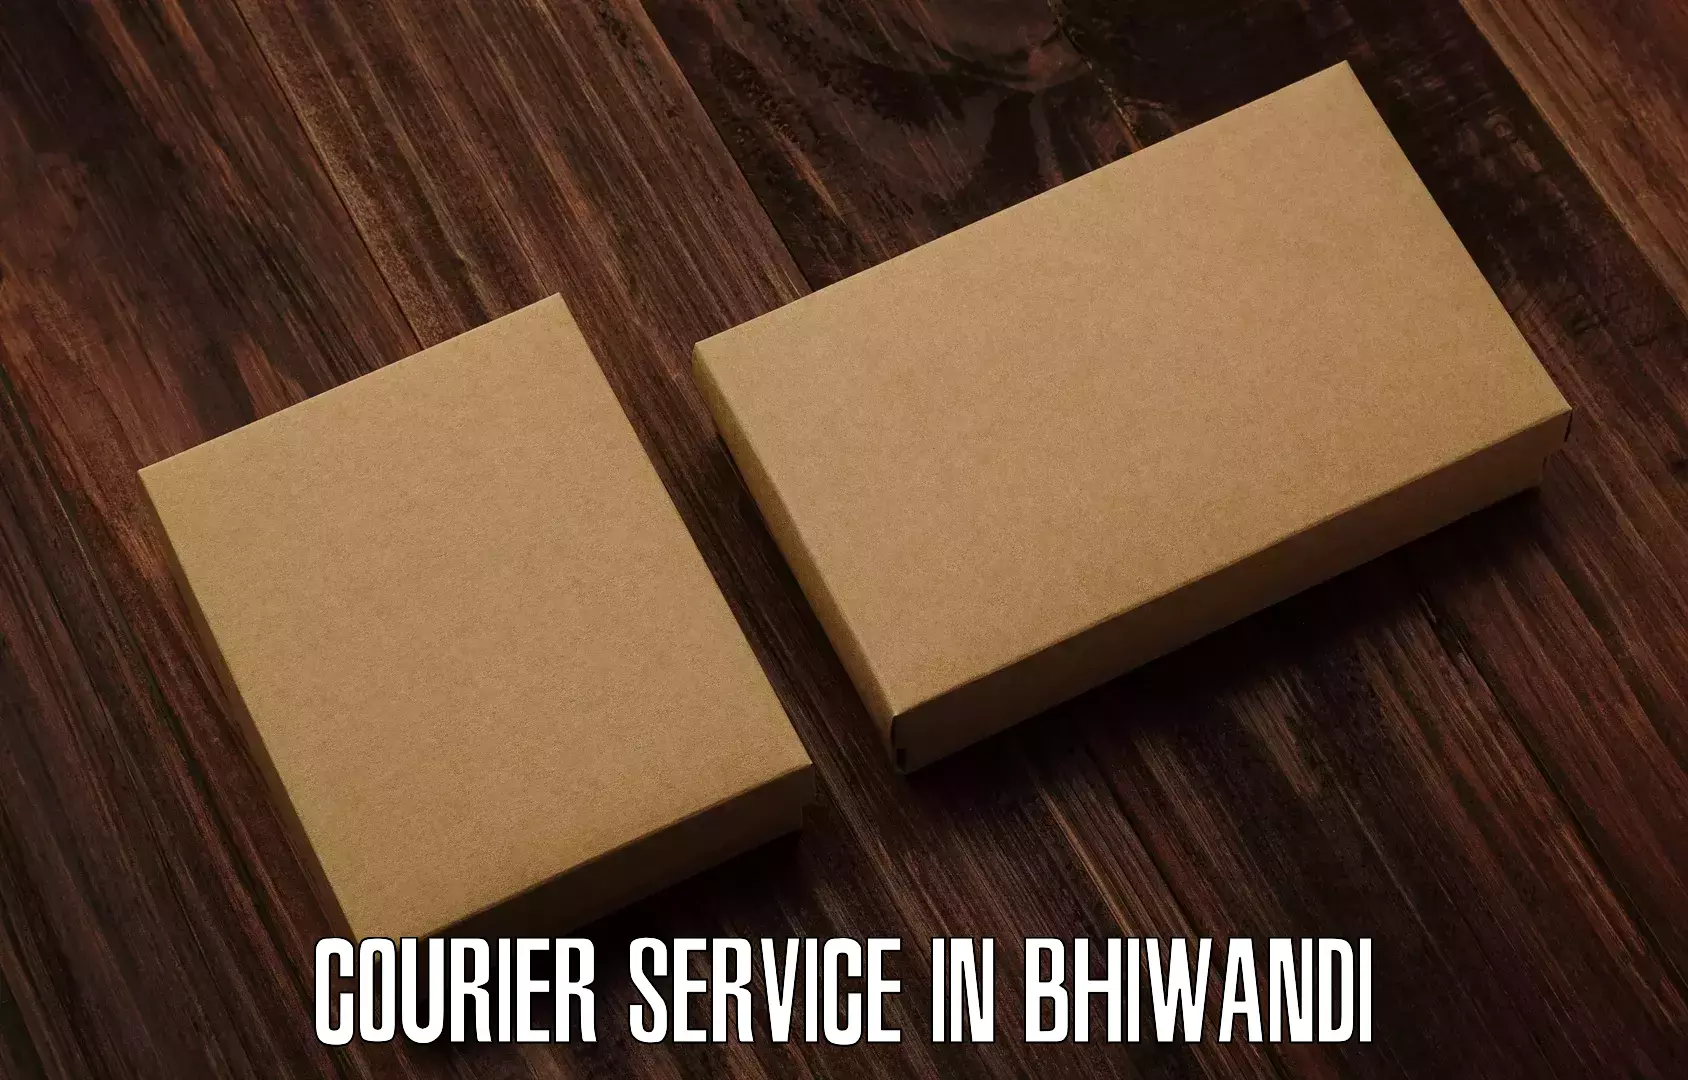 Advanced freight services in Bhiwandi